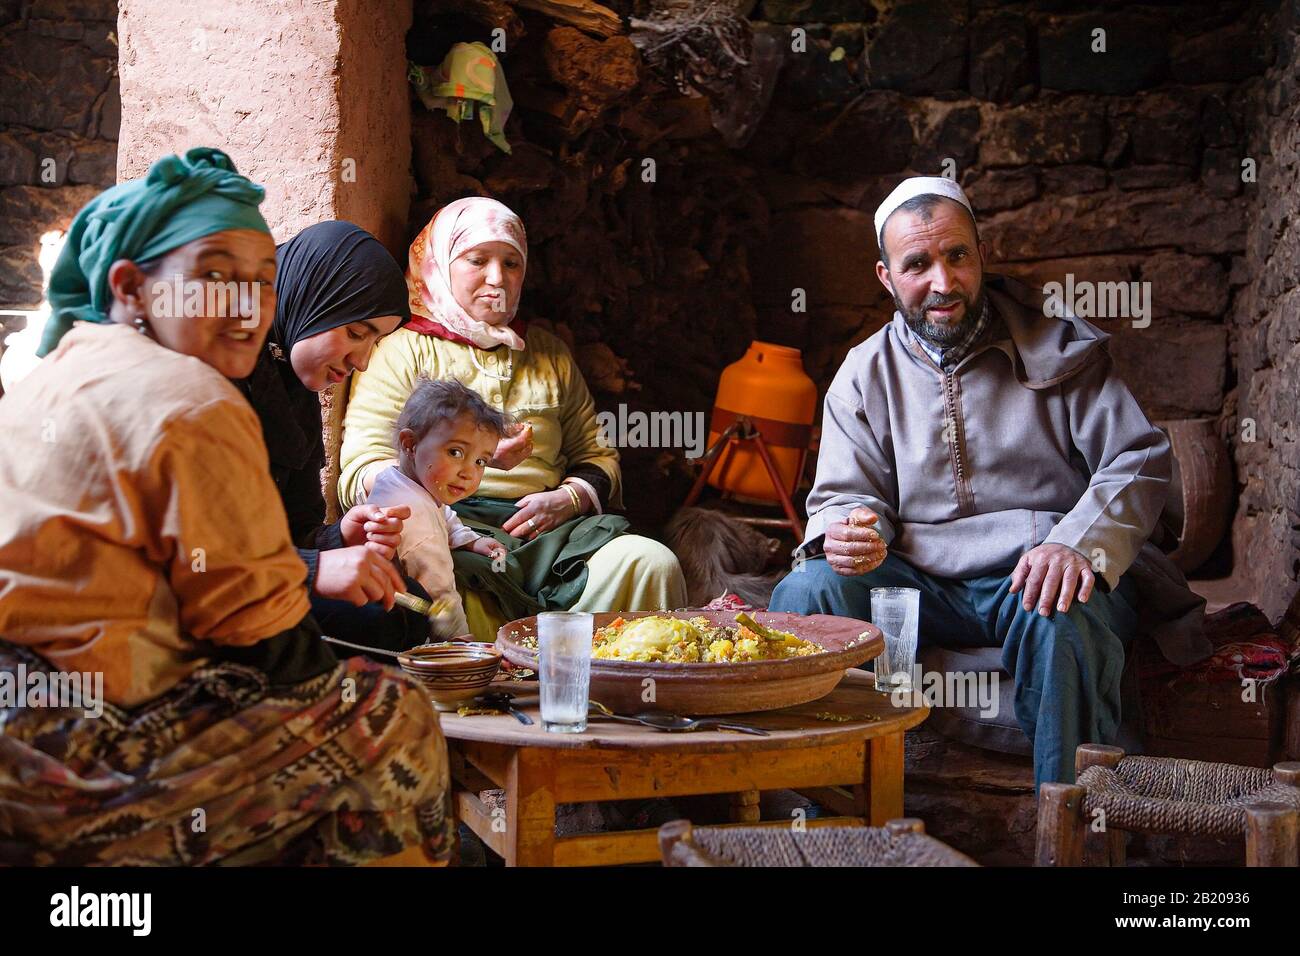 MARRAKECH, MOROCCO - March 09, 2007. A Berber family eat a traditional tagine meal in a Moroccan house near Marrakech, Morocco Stock Photo